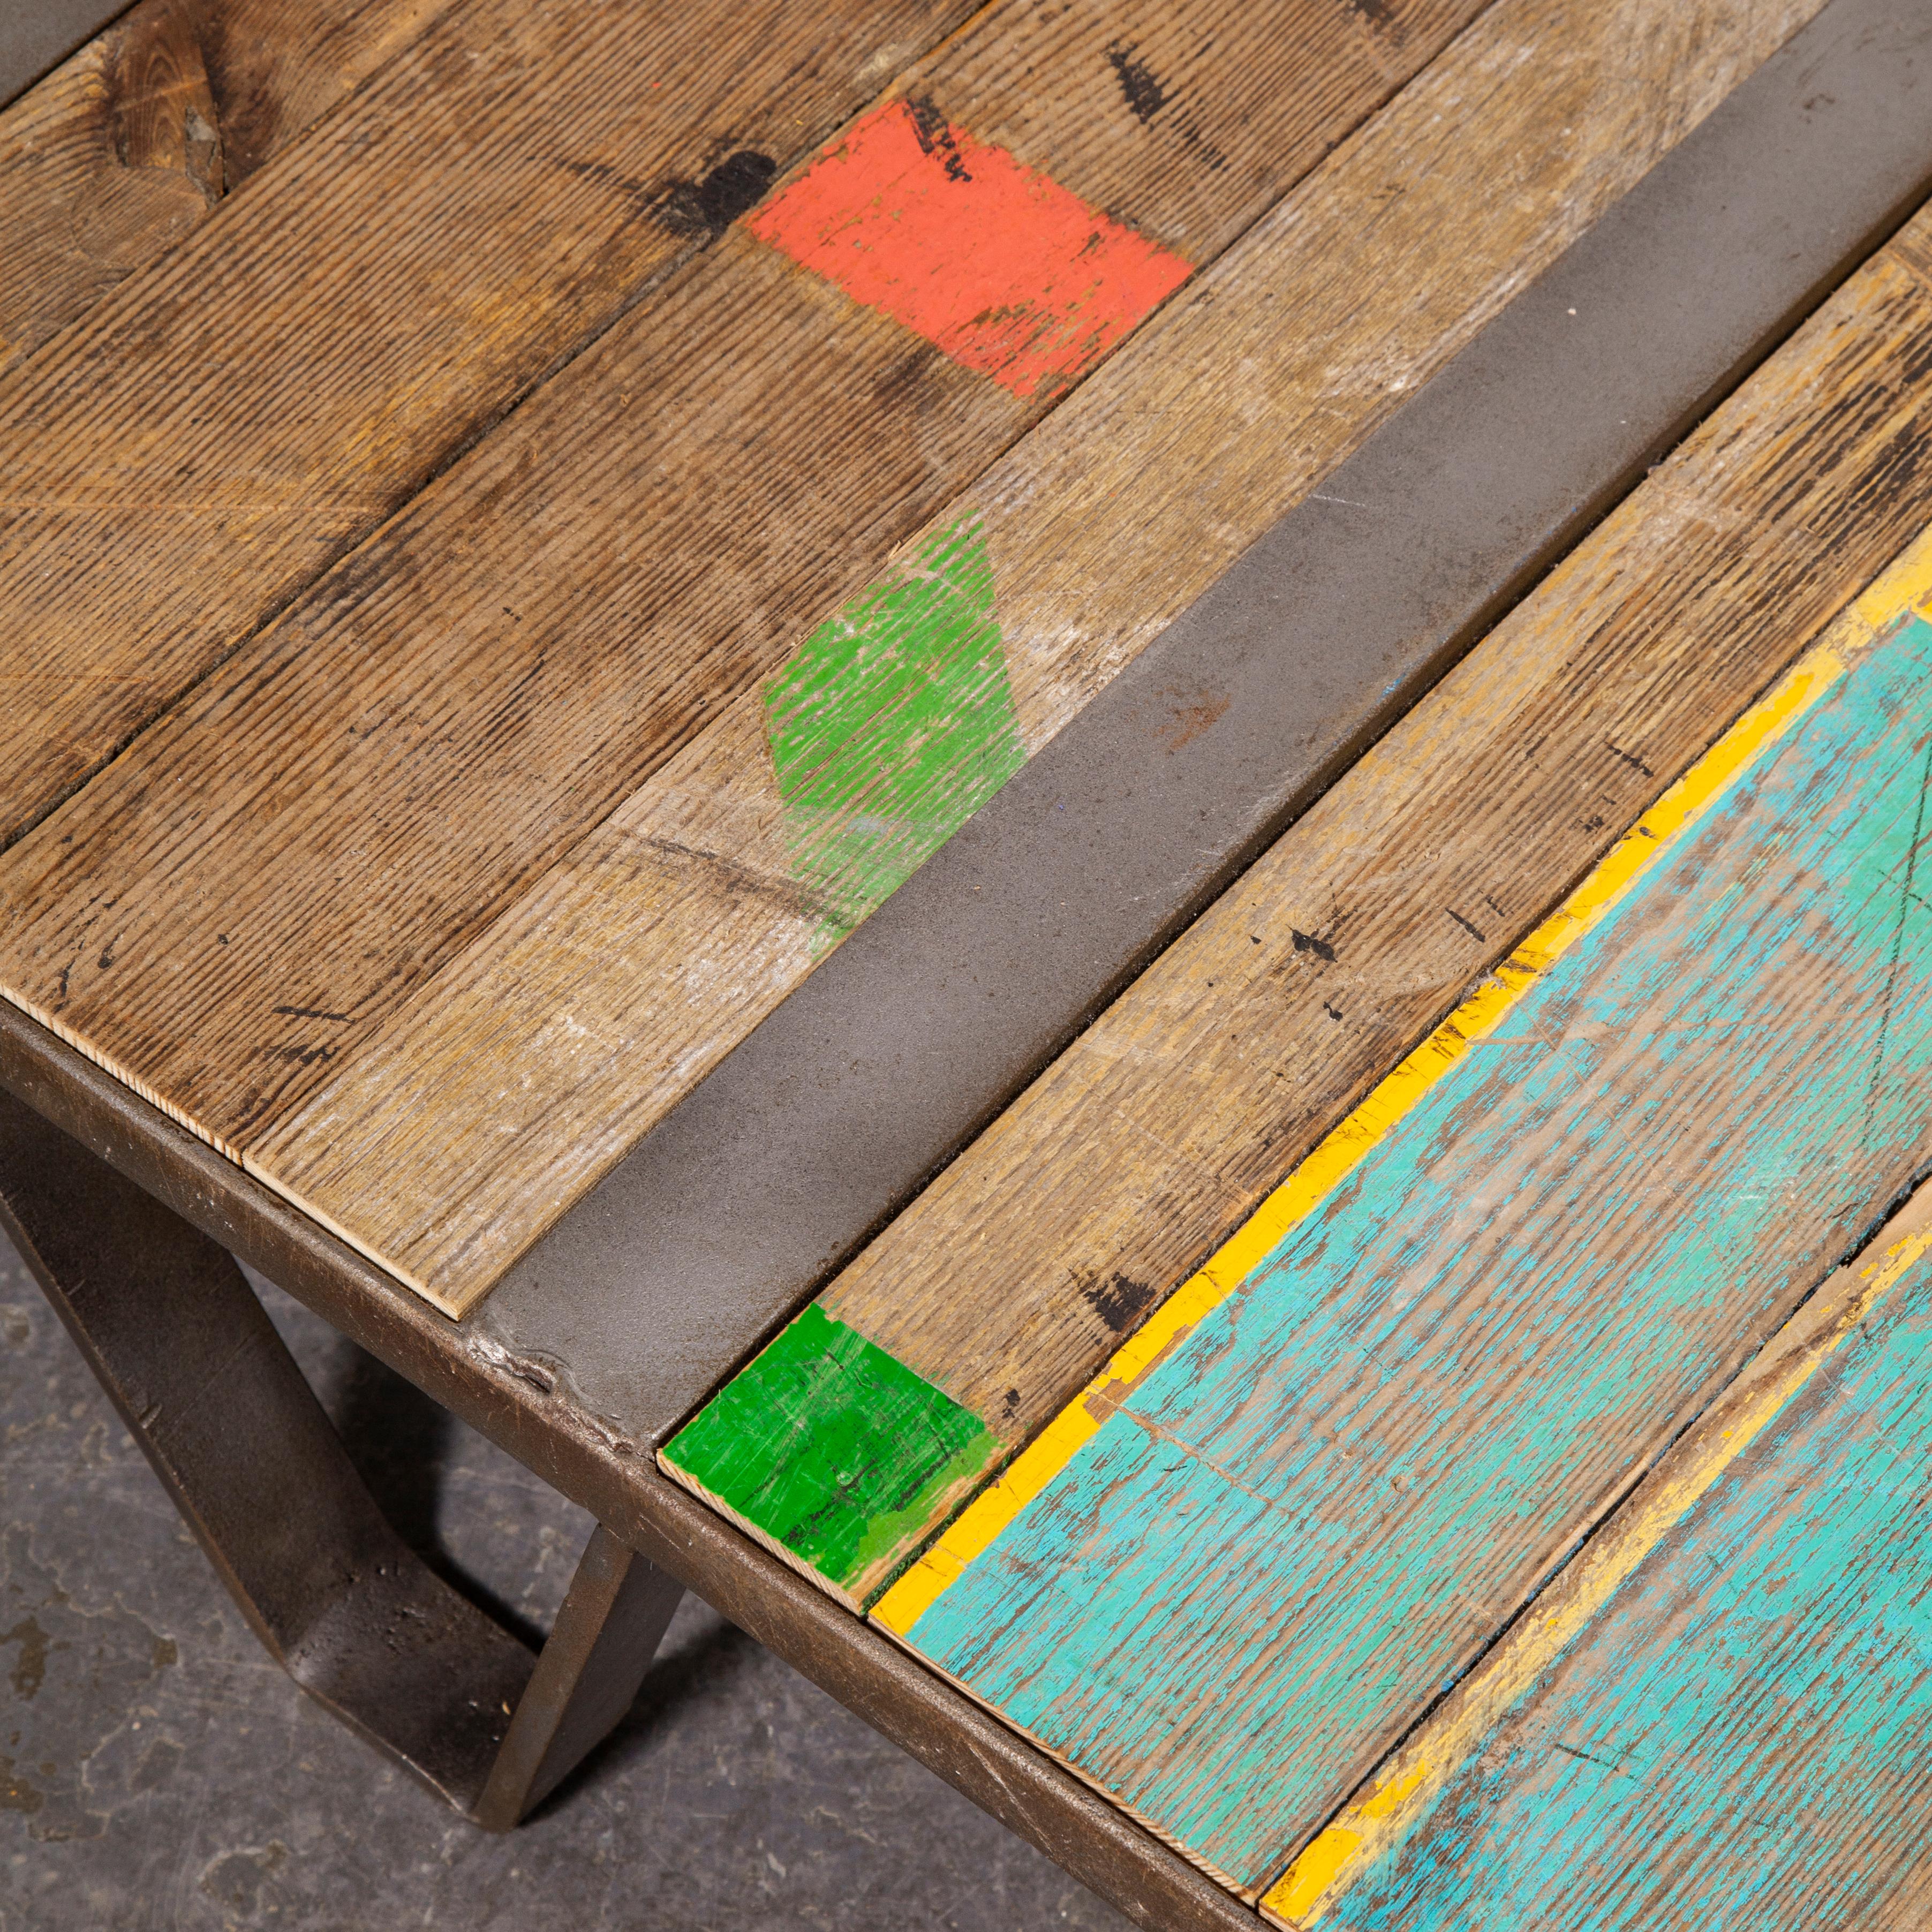 1970’s Low occasional industrial table, coffee table. Sourced from the South of France we have a number of these industrial French metal pallet bases which we have cleaned up finished with reclaimed sports hall flooring. The table is the perfect